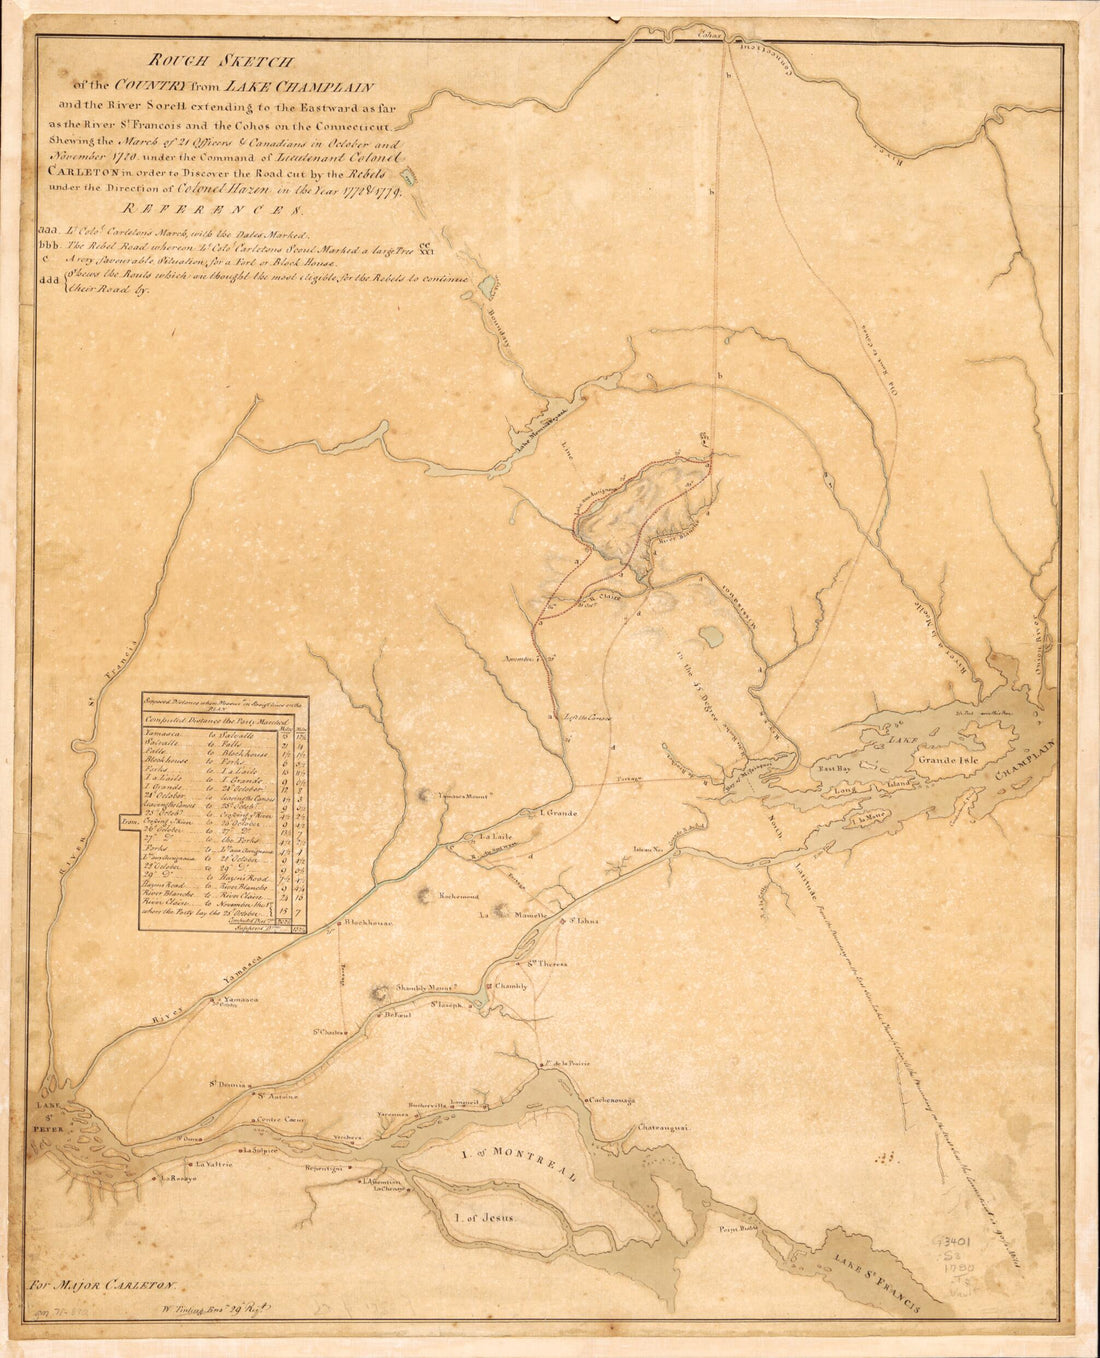 This old map of Rough Sketch of the Country from Lake Champlain and the River Sorell Extending to the Eastward As Far As the River St. Francois and the Cohos On the Connecticut, Shewing the March of 21 Officers &amp; Canadians In October and November from 1780 Under th was created by Thomas Carleton, William Tinling in 1780